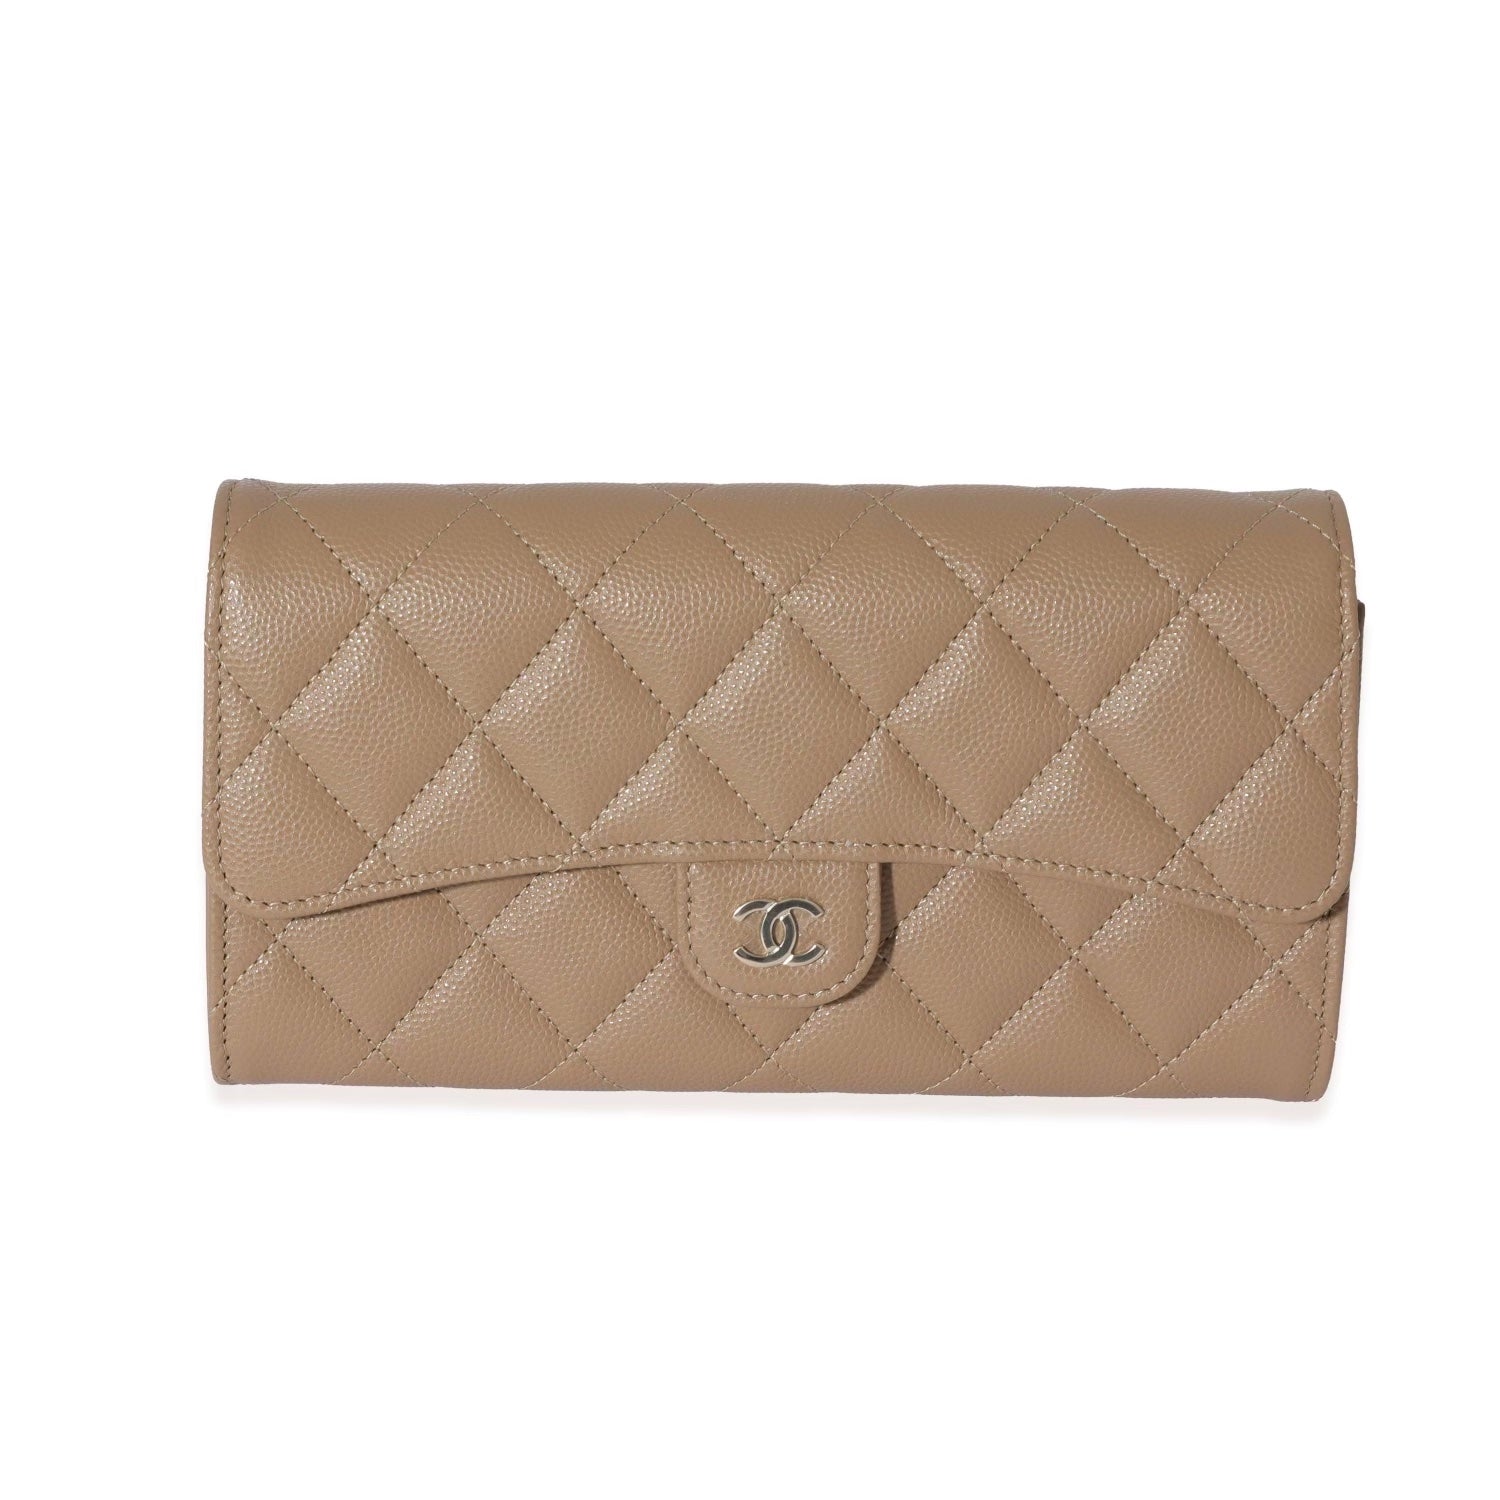 CHANEL Caviar Quilted Classic Flat Wallet Pouch Beige 631377